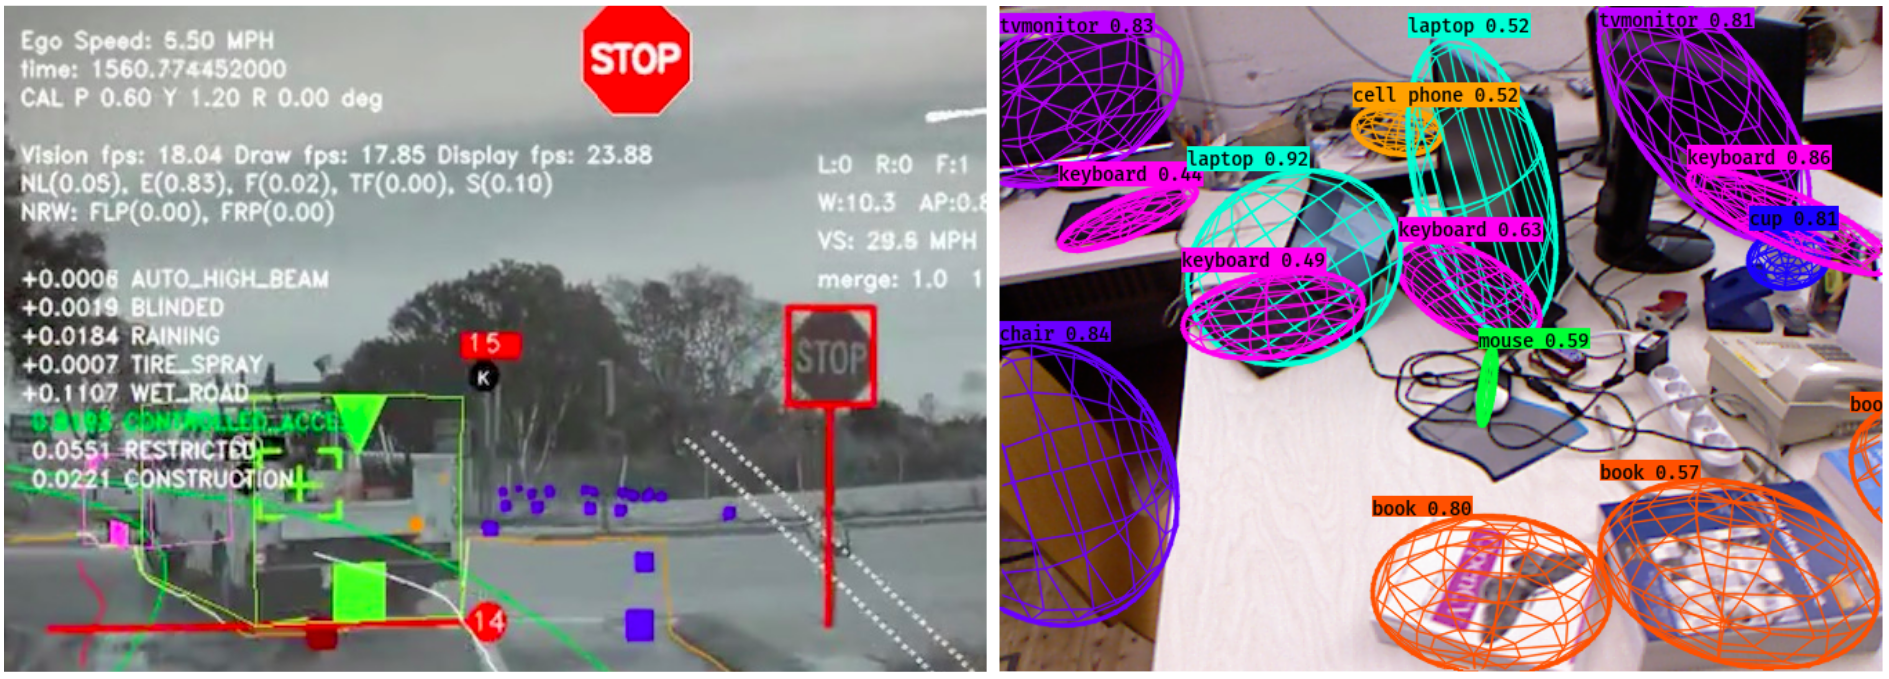 Semantic SLAM - How Tesla Autopilot sees the world (left) and augmenting SLAM with object information (right)